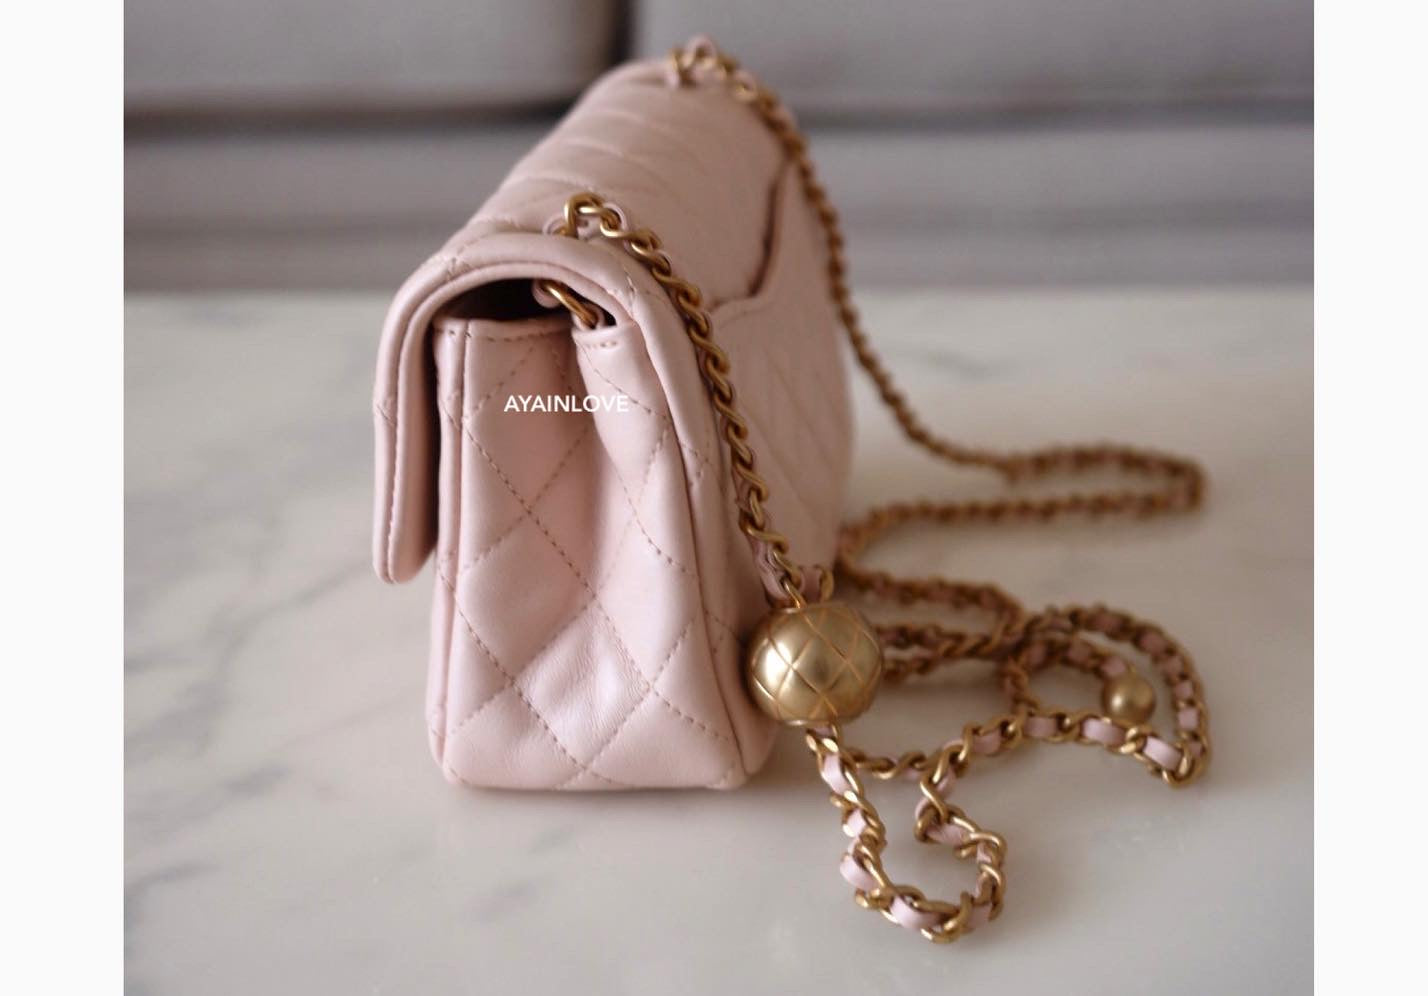 Chanel Pearl Crush Square Flap Bag Quilted Lambskin Mini